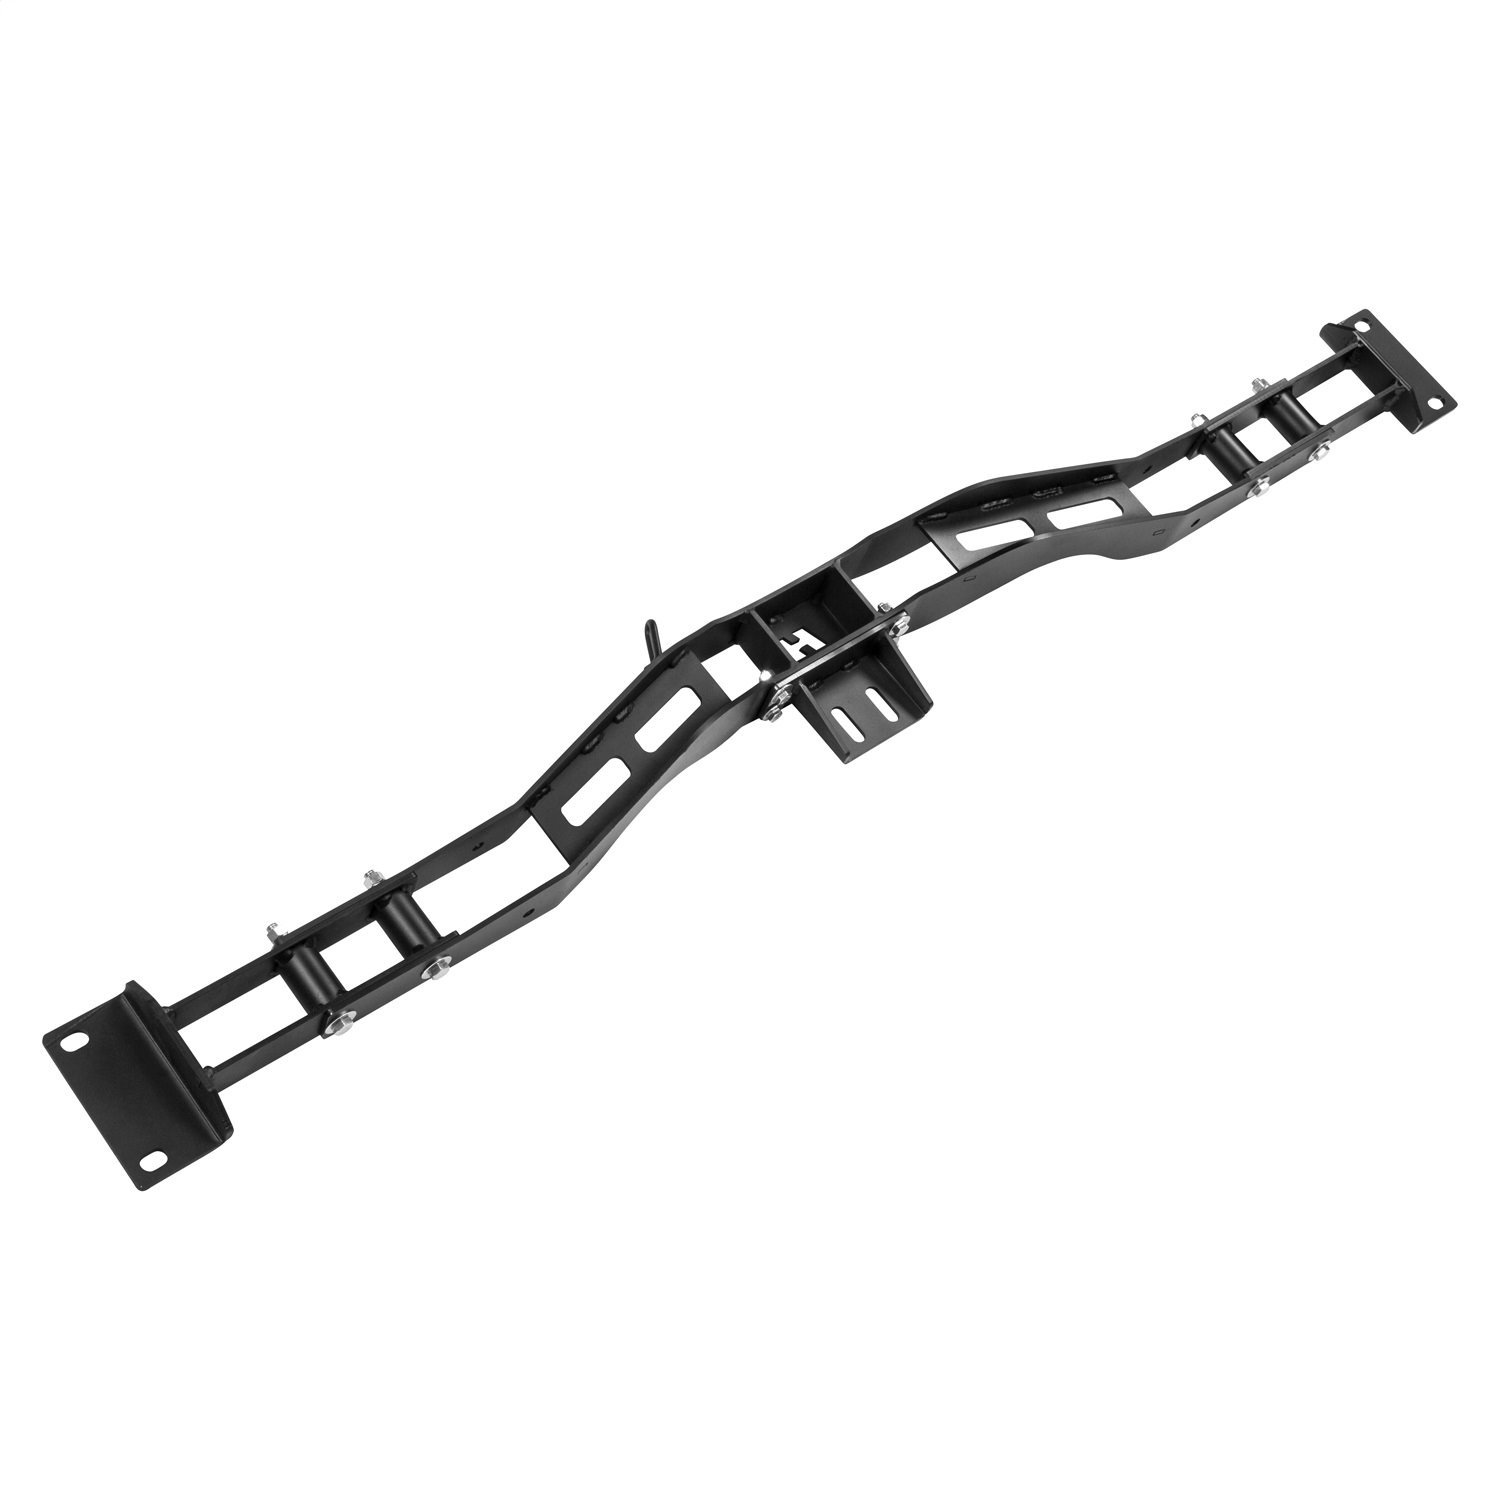 67510020 Adjustable Transmission Crossmember for Select 1968-1972 GM A-Body Cars